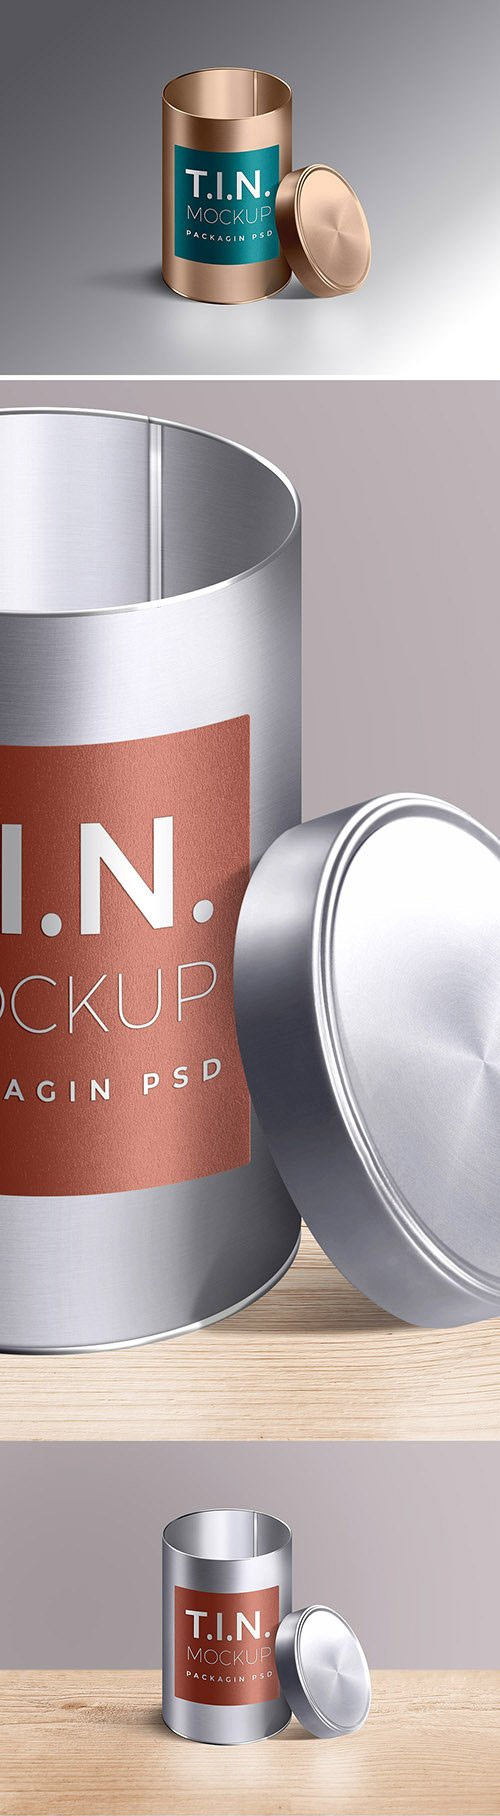 PSD Mock-Up - Tin Container Packaging 3